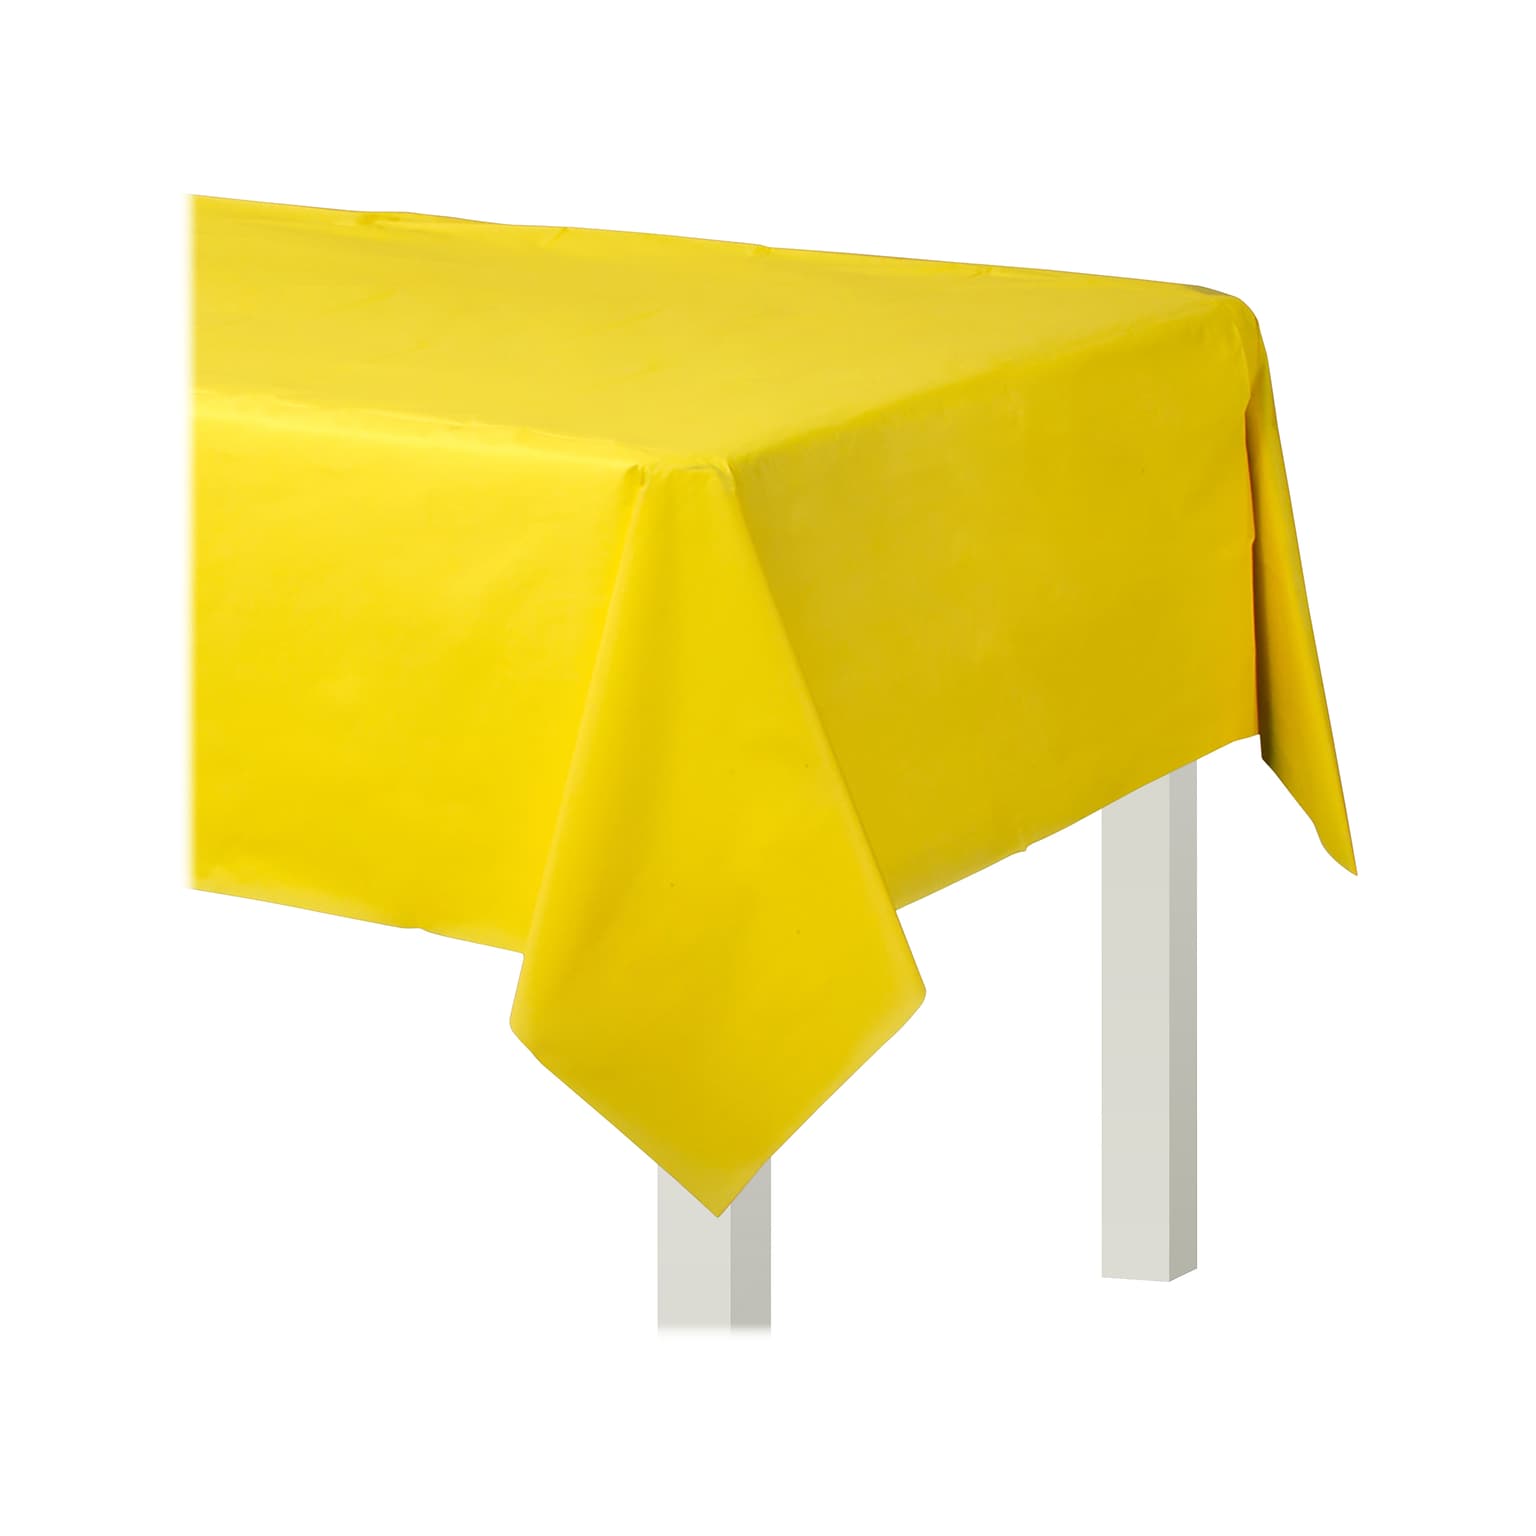 Amscan Party Table Cover, Yellow Sunshine, 2/Pack (579592.09)